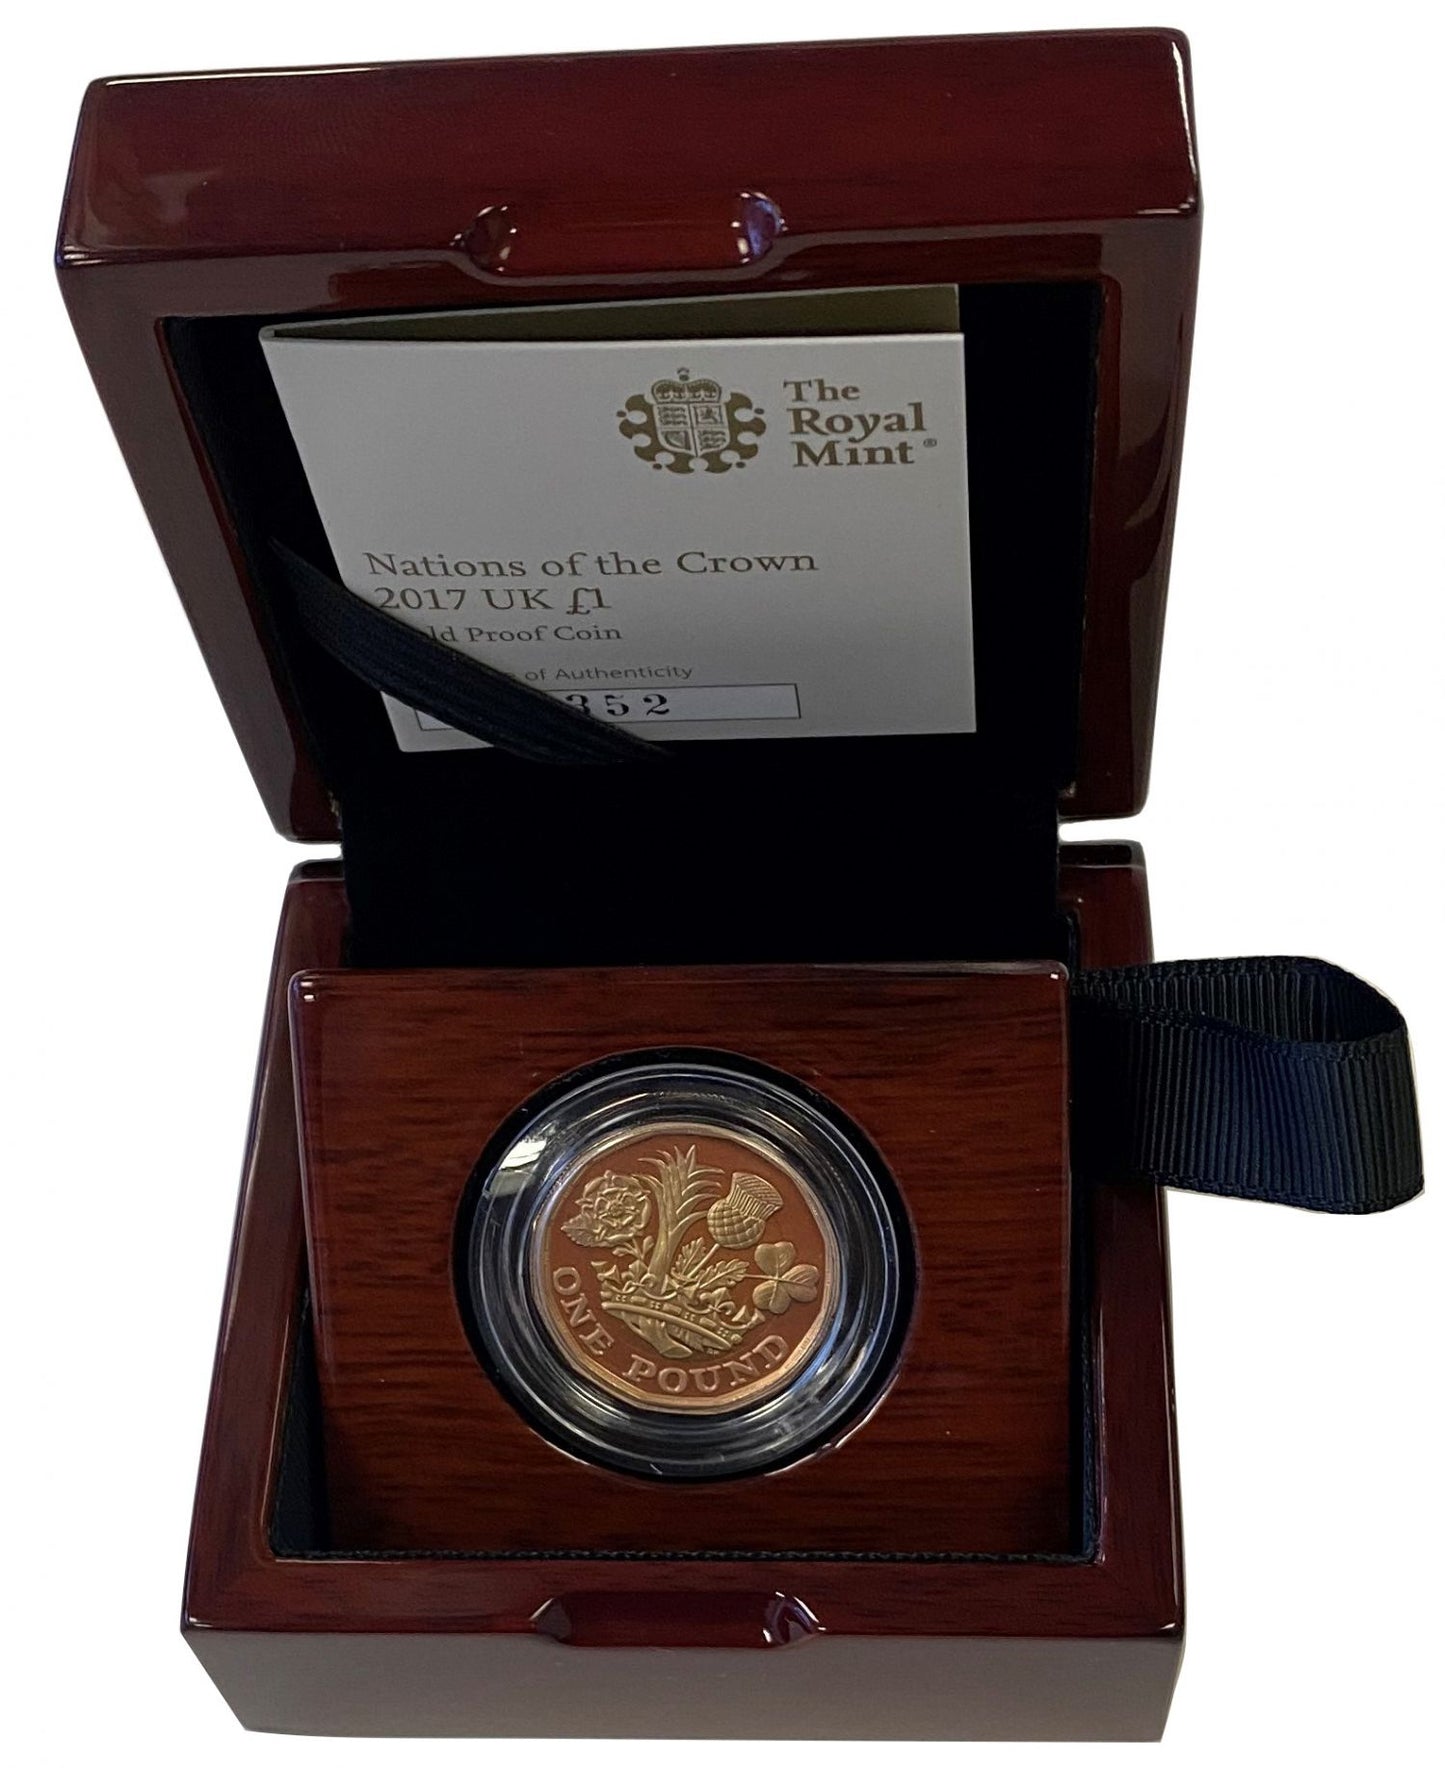 Elizabeth II 2017 gold proof £1 - Nations of the Crown